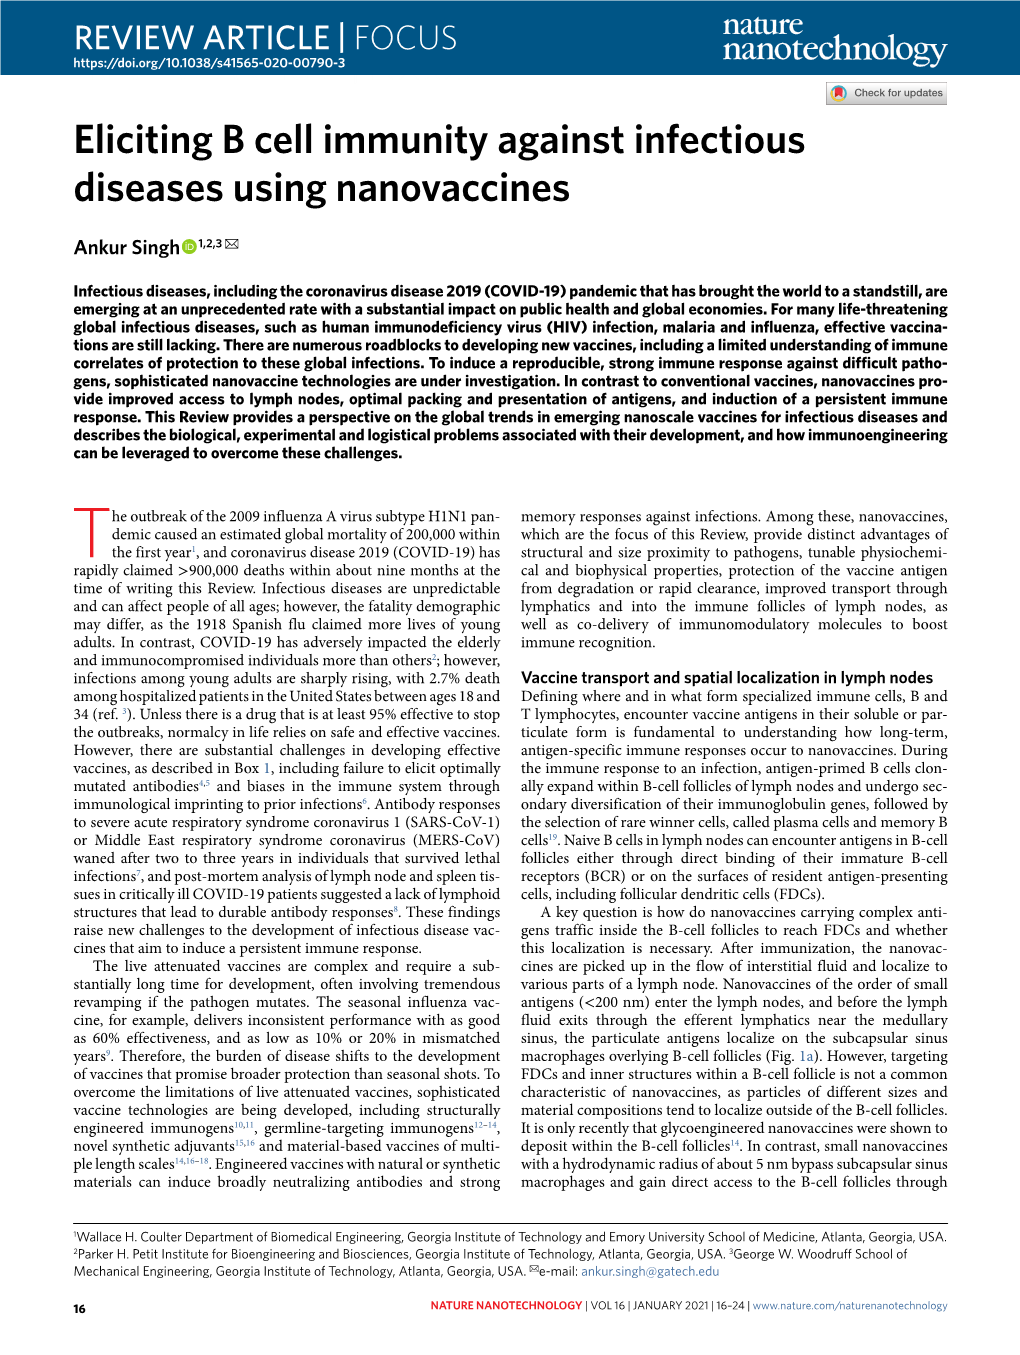 Eliciting B Cell Immunity Against Infectious Diseases Using Nanovaccines